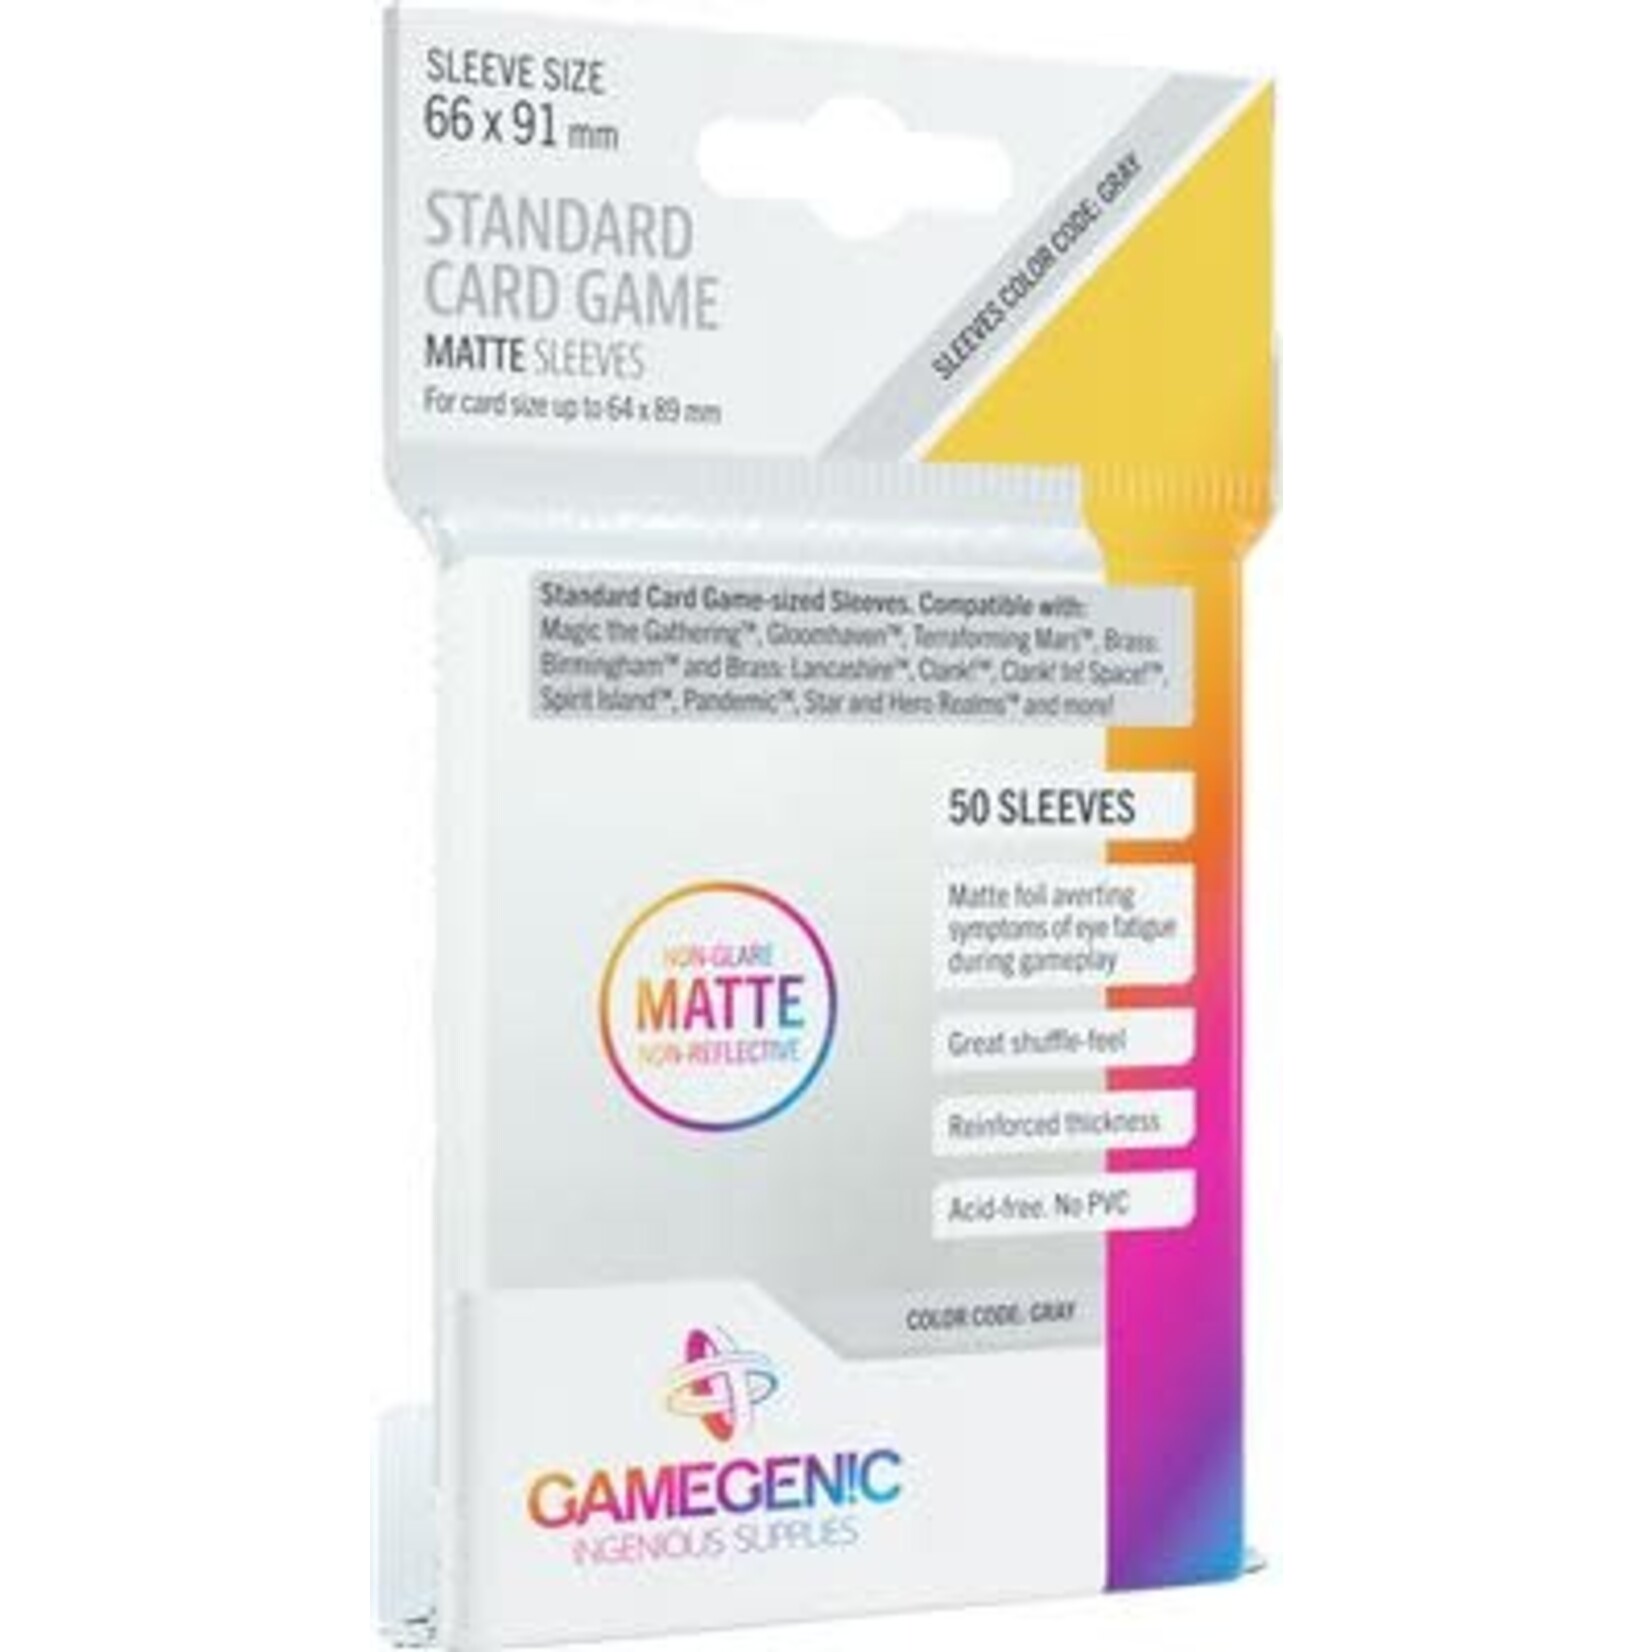 Gamegenic MATTE Sleeves: Standard Card Game (66 x 91 mm)